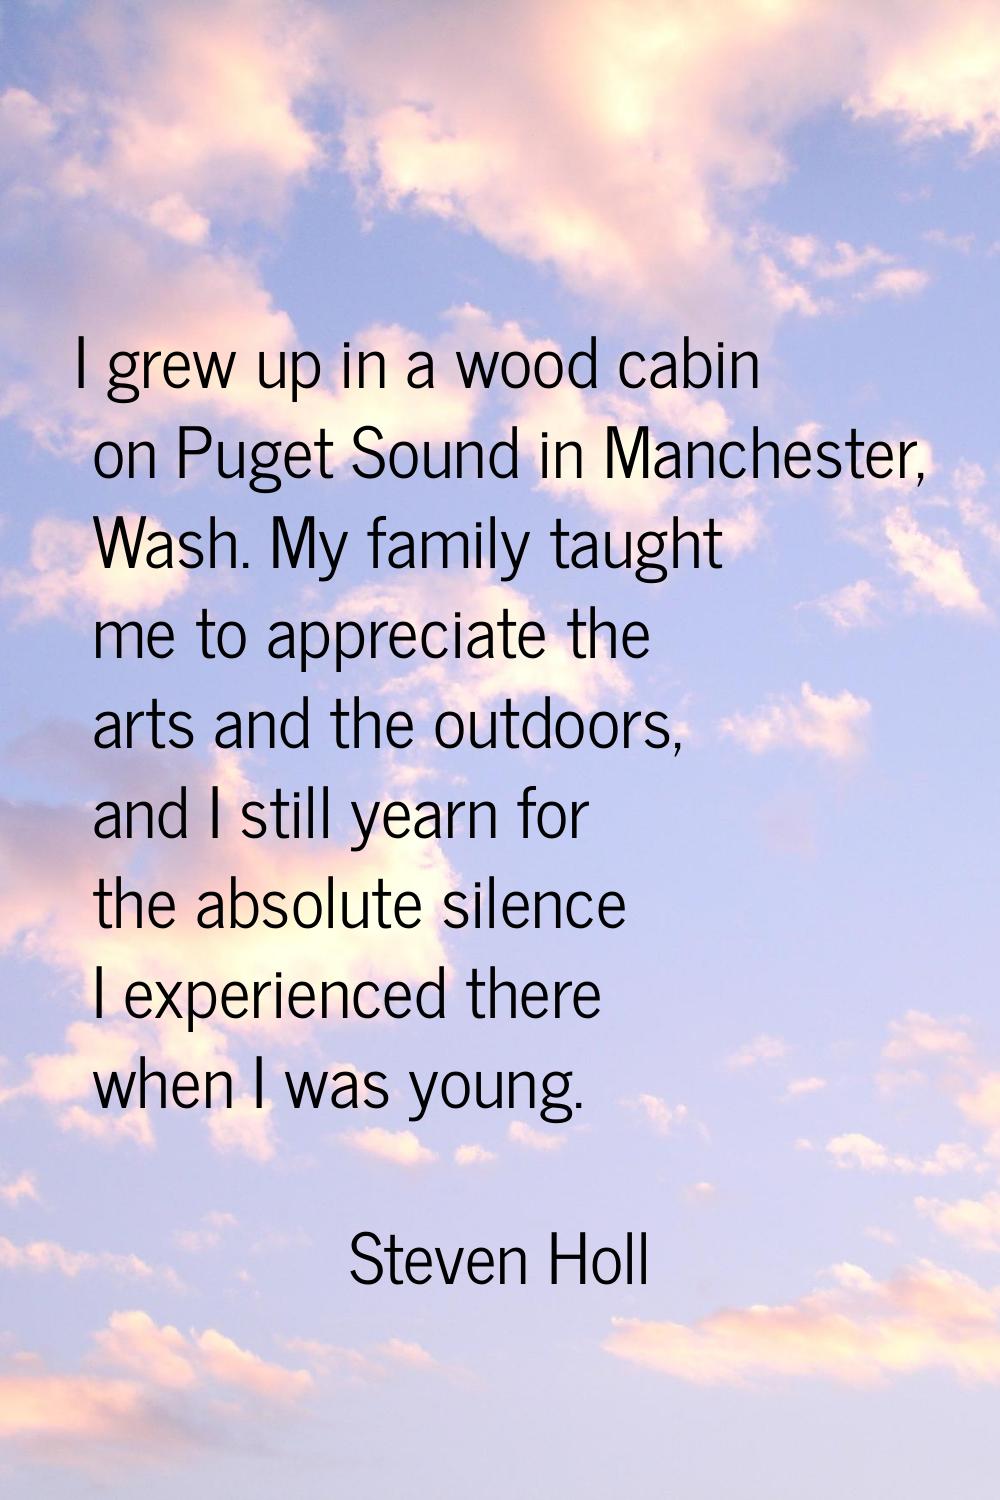 I grew up in a wood cabin on Puget Sound in Manchester, Wash. My family taught me to appreciate the